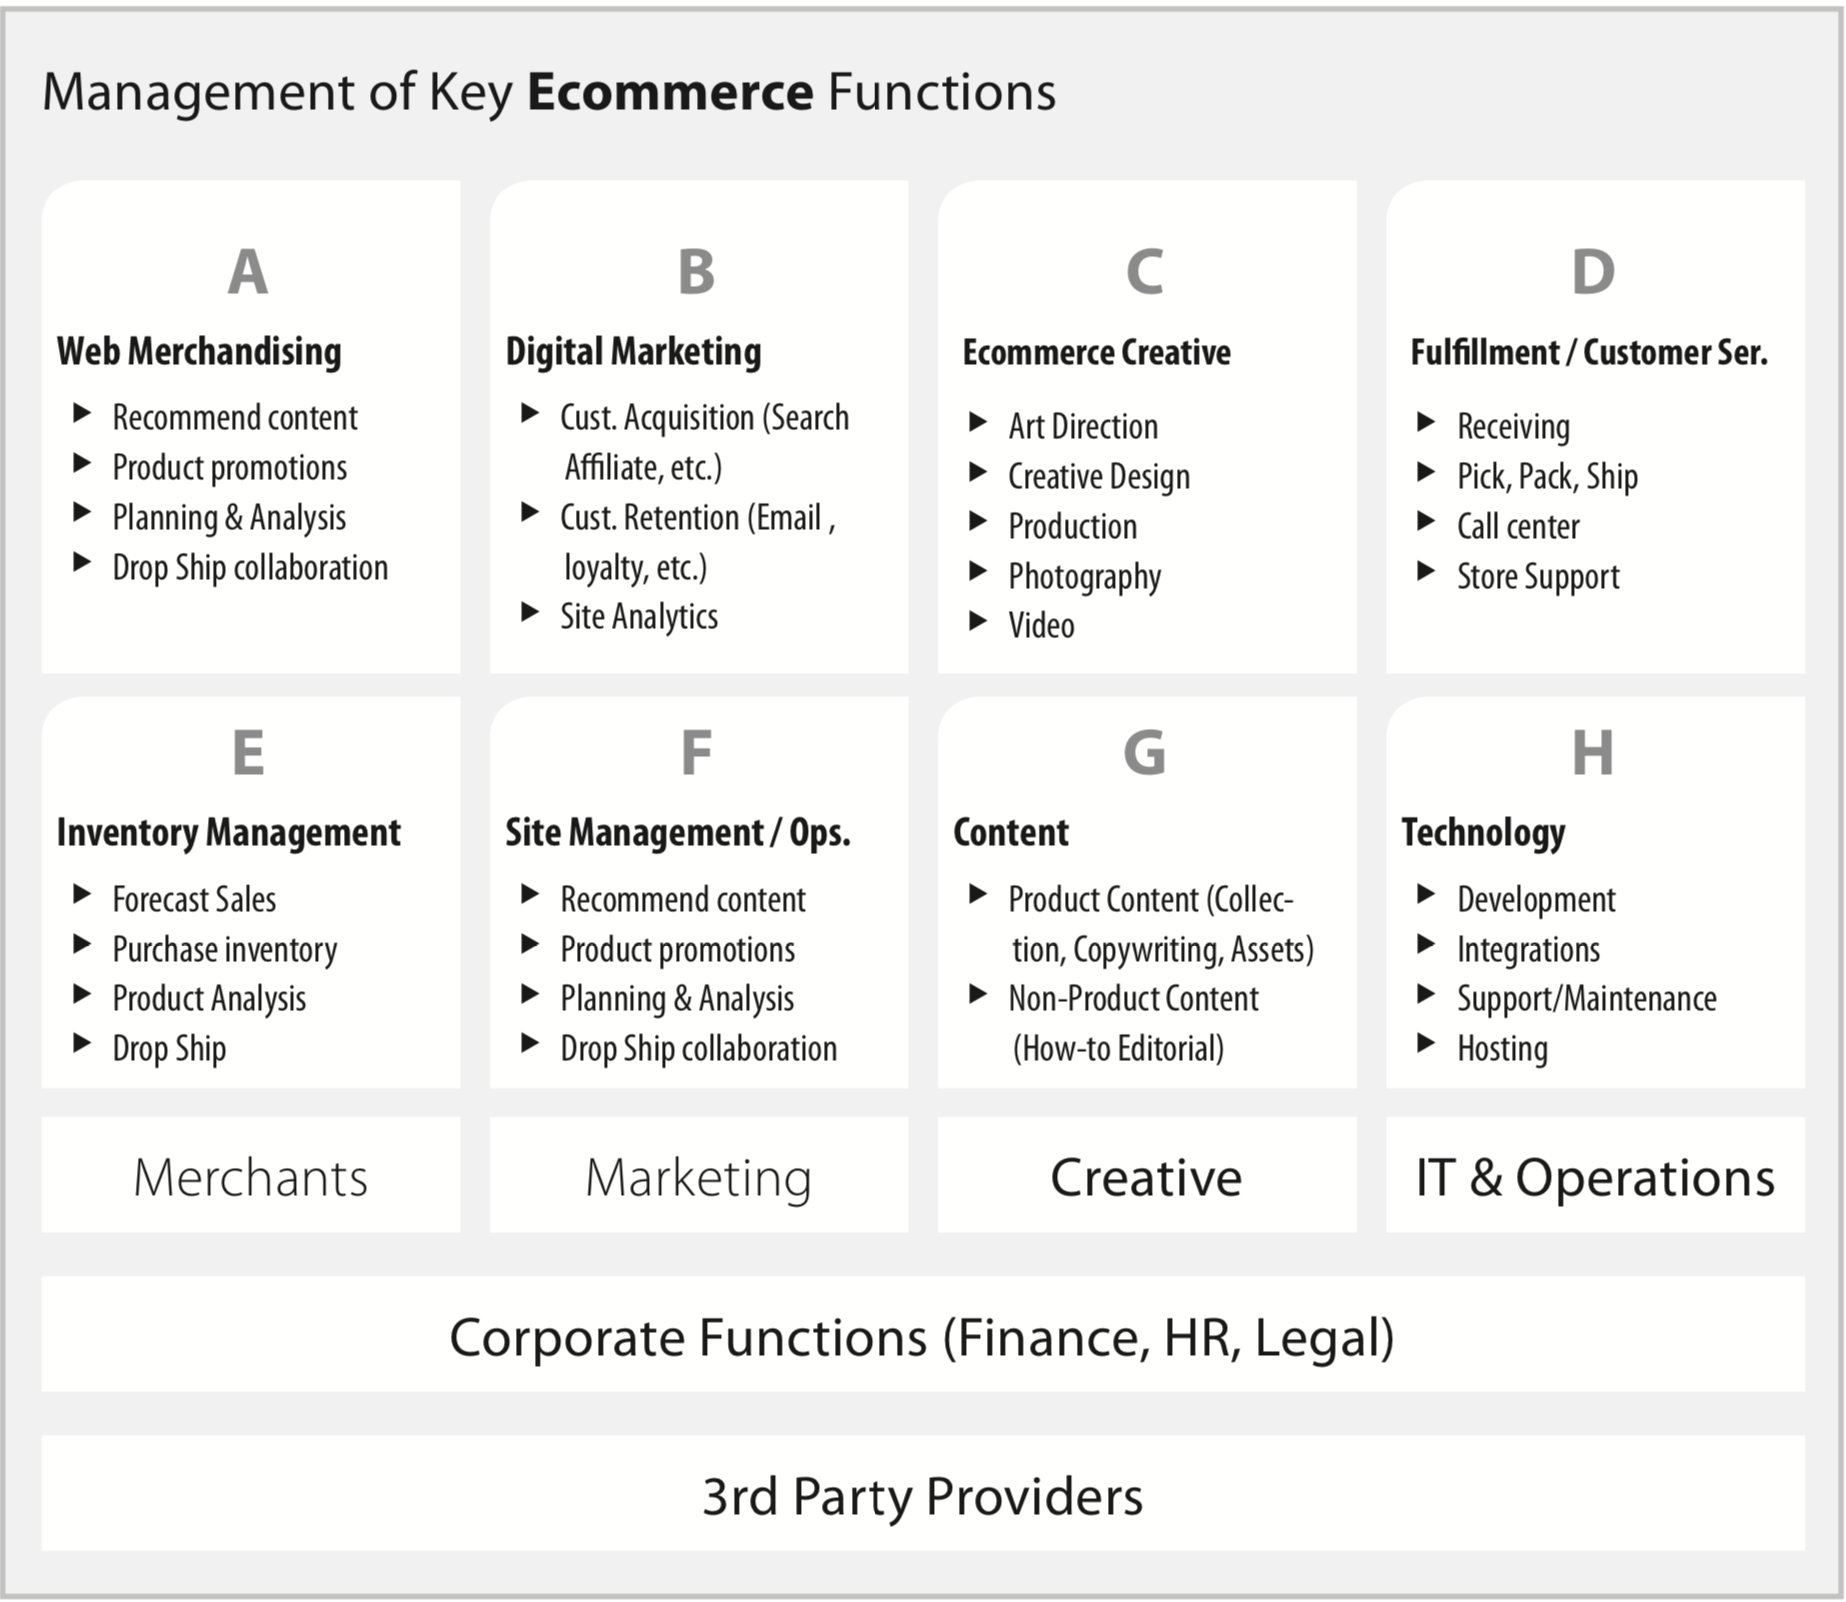 key-ecommerce-functions-mgmt